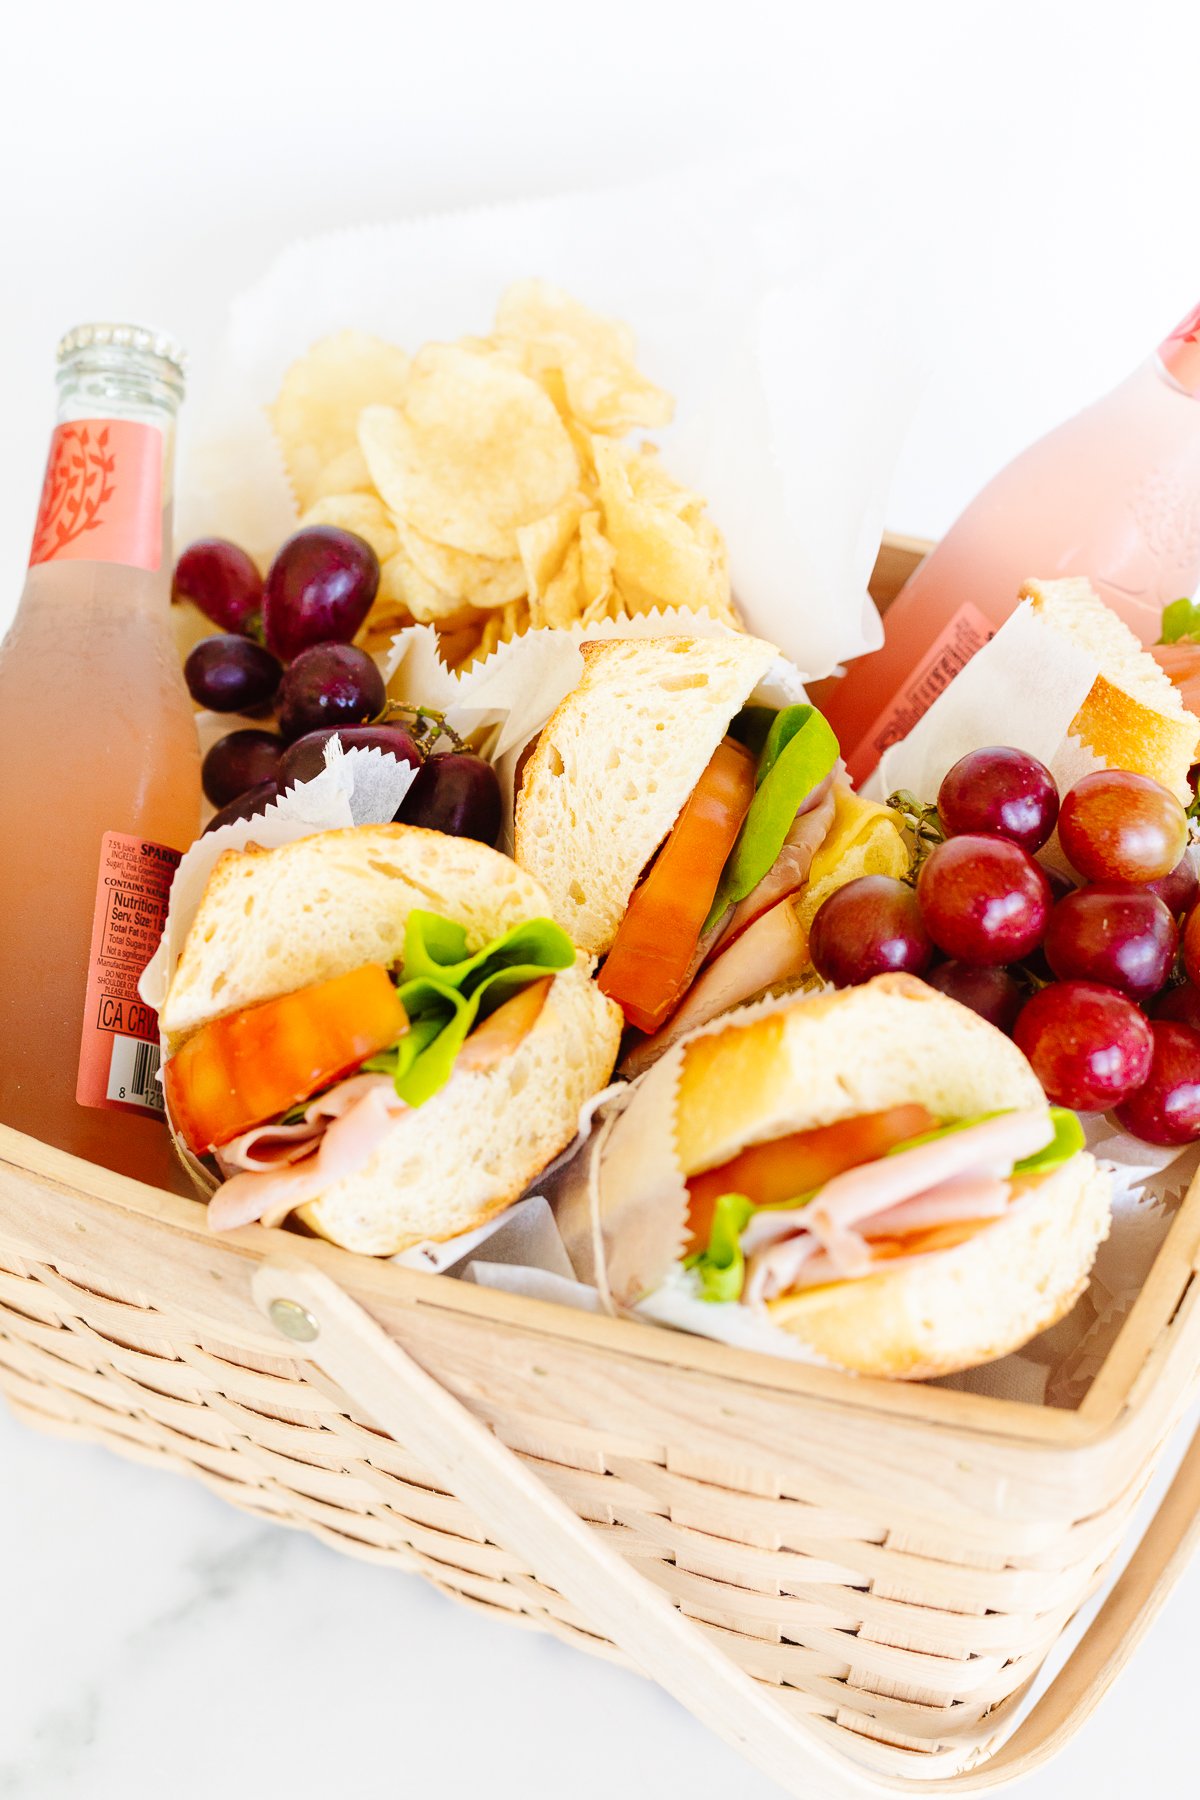 A wicker basket filled with Fourth of July picnic sandwiches and grapes.